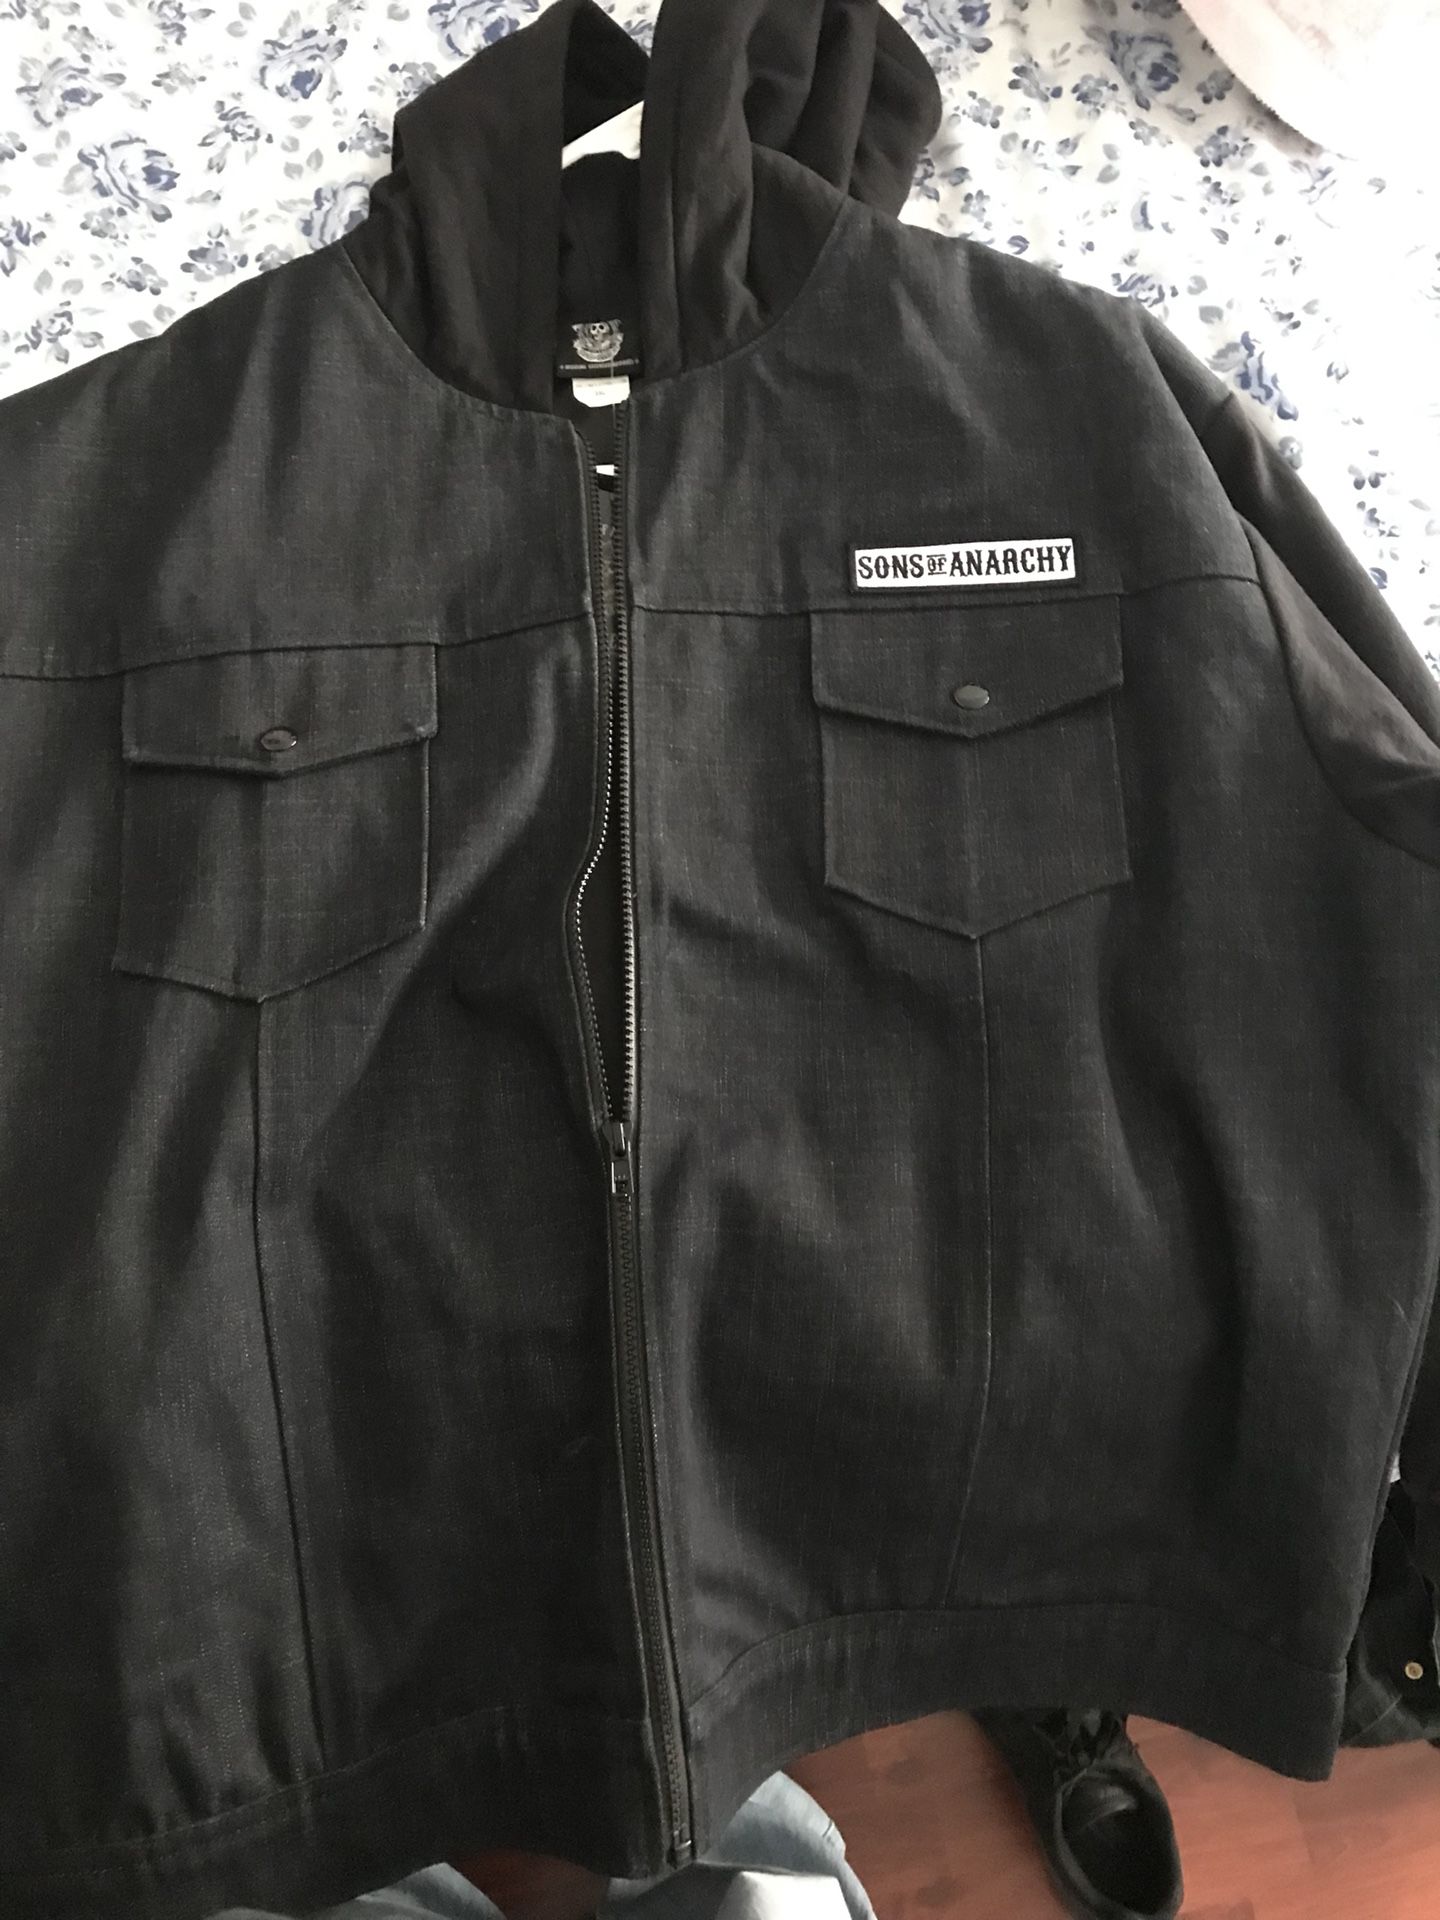 Sons of anarchy jacket